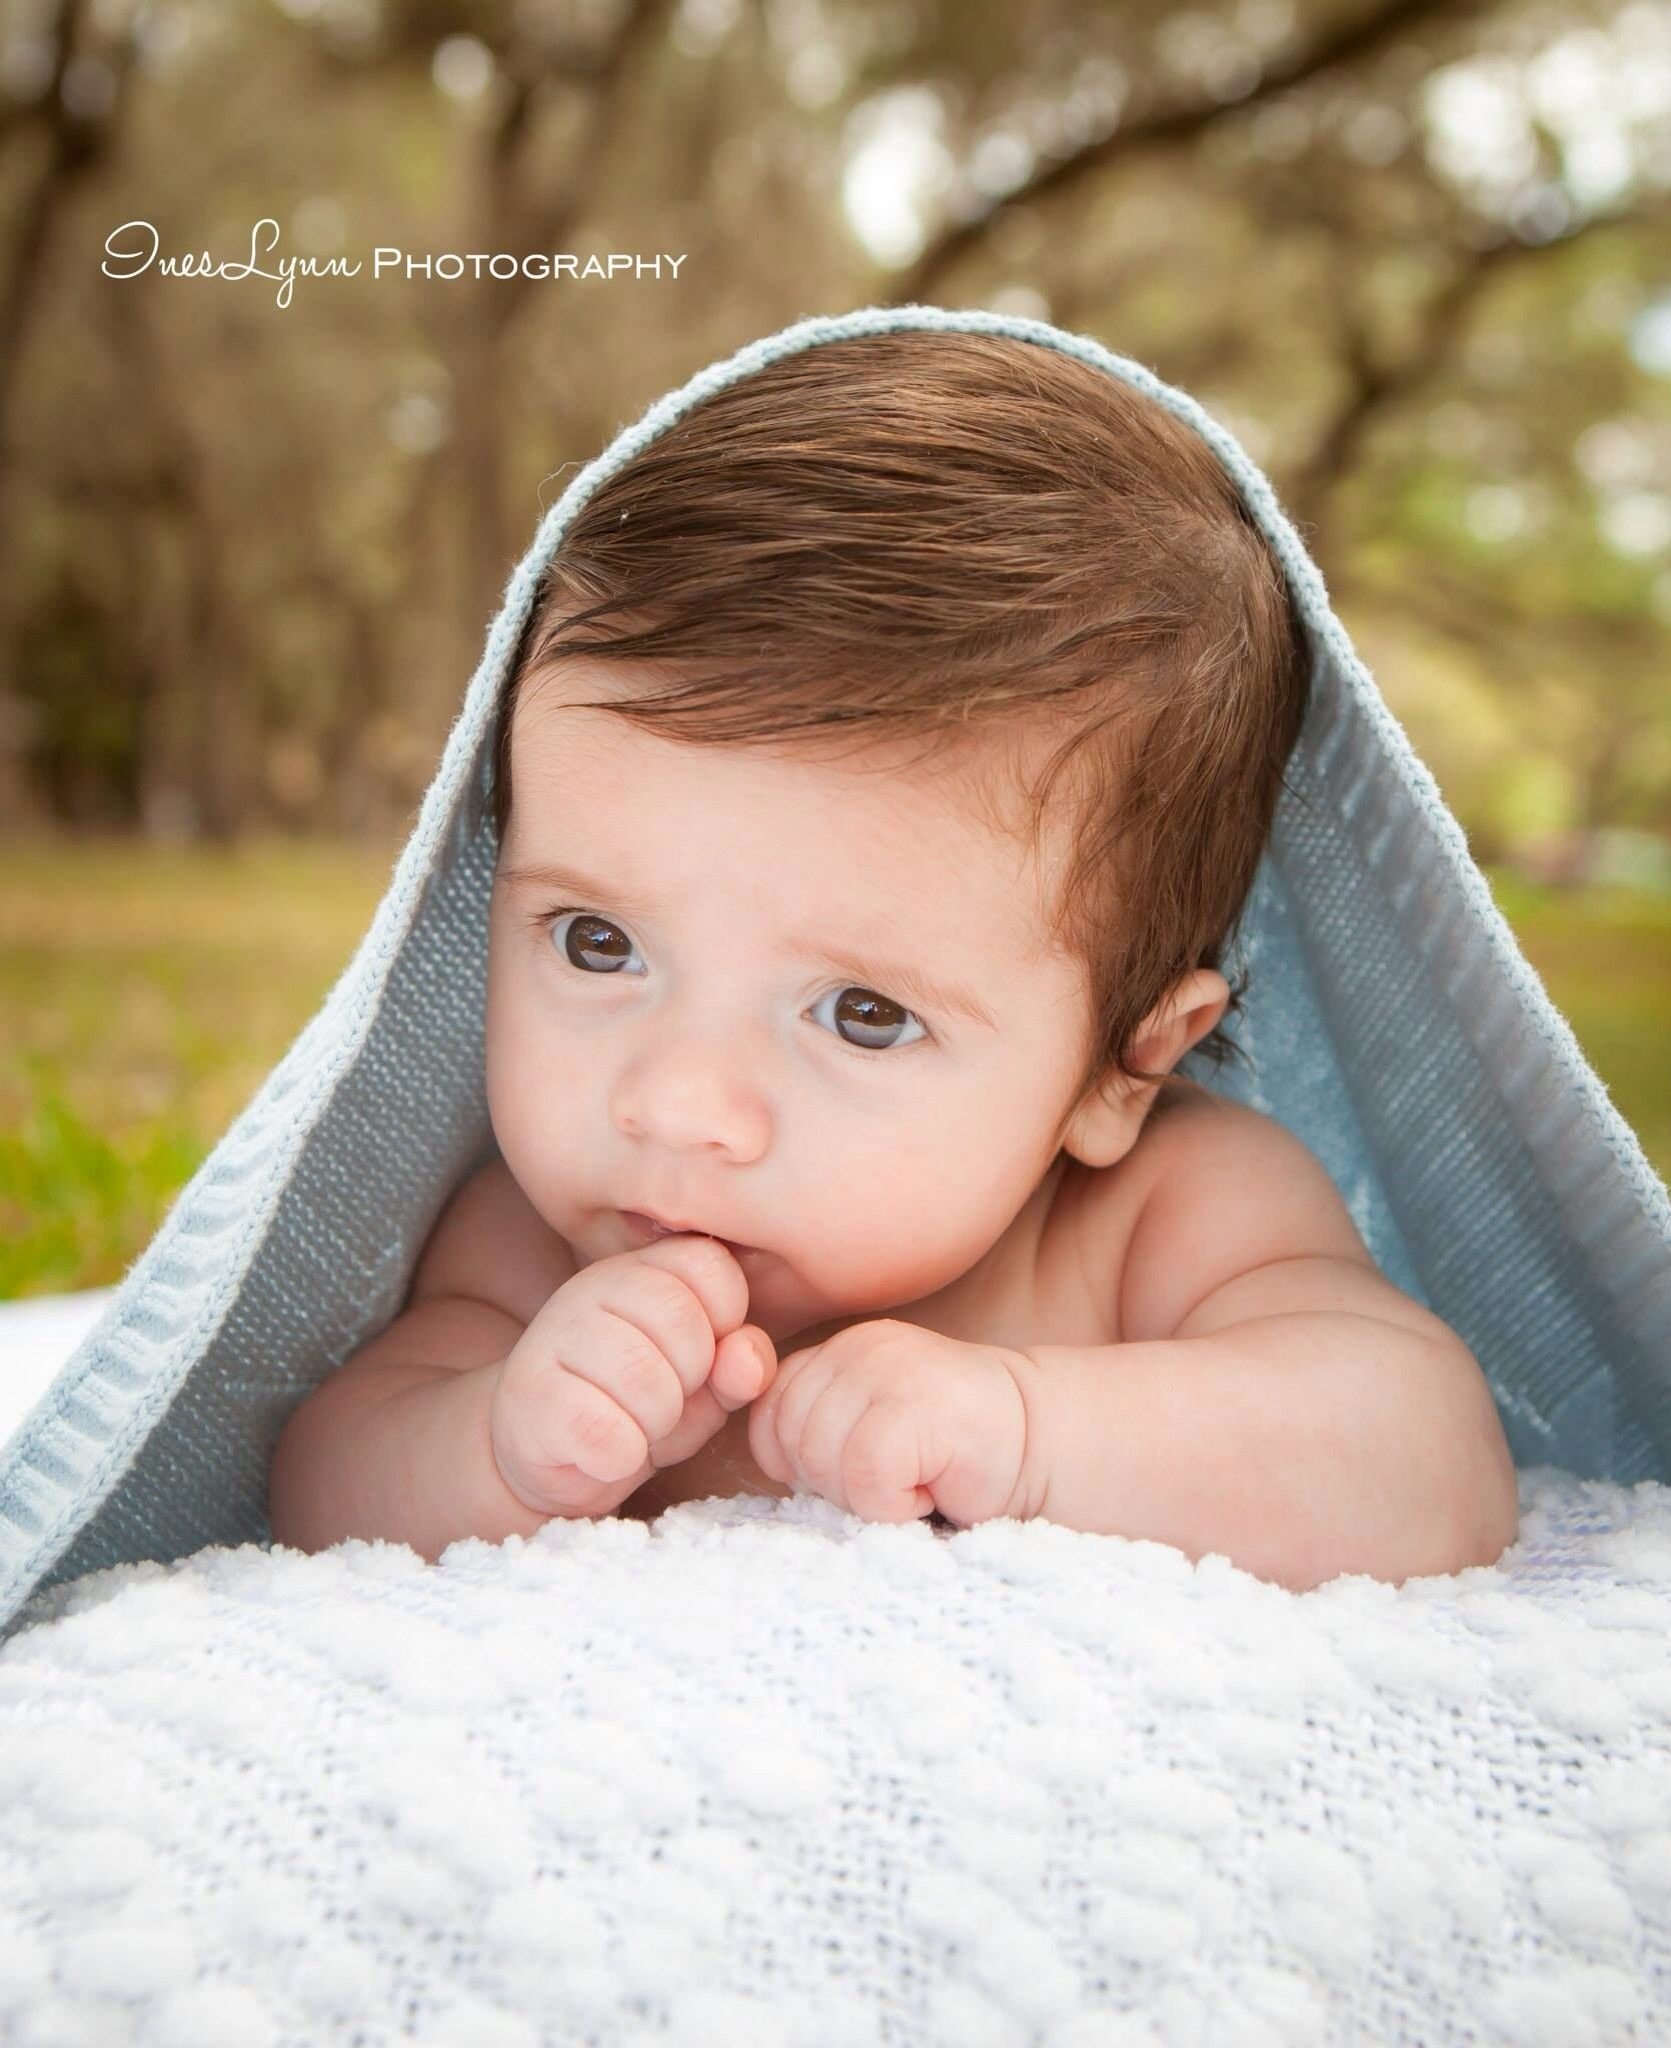 10 Fantastic 3 Month Old Photo Ideas newborn photography newborn photography the importance of 2022